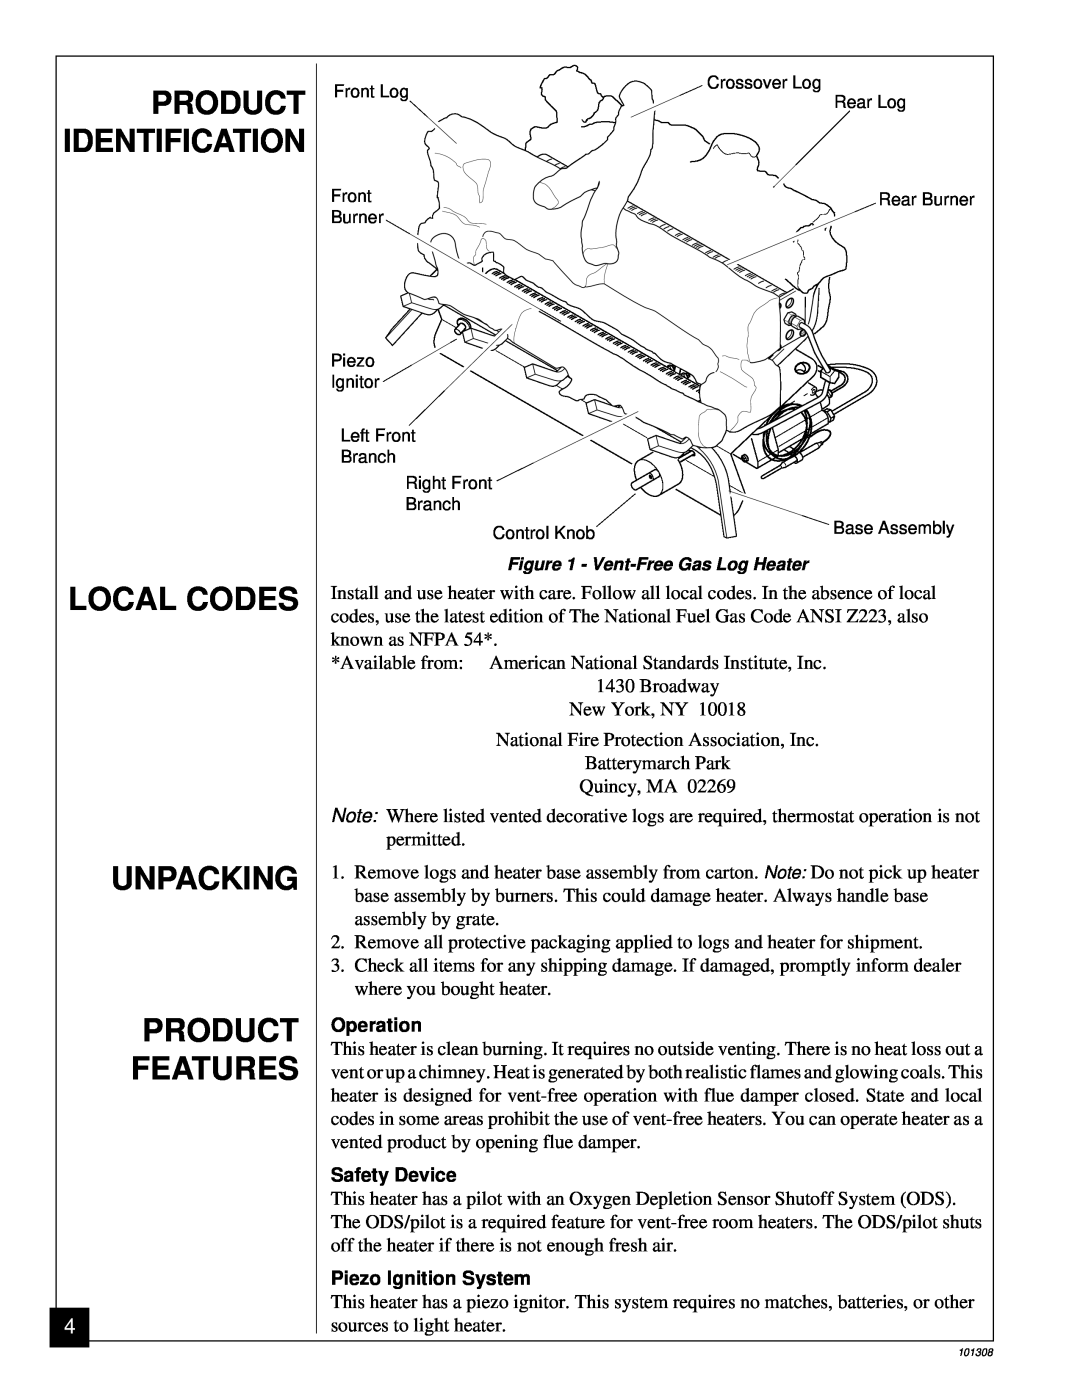 Desa NATURAL GAS LOG HEATER installation manual Local Codes Unpacking Product Features, Product Identification 